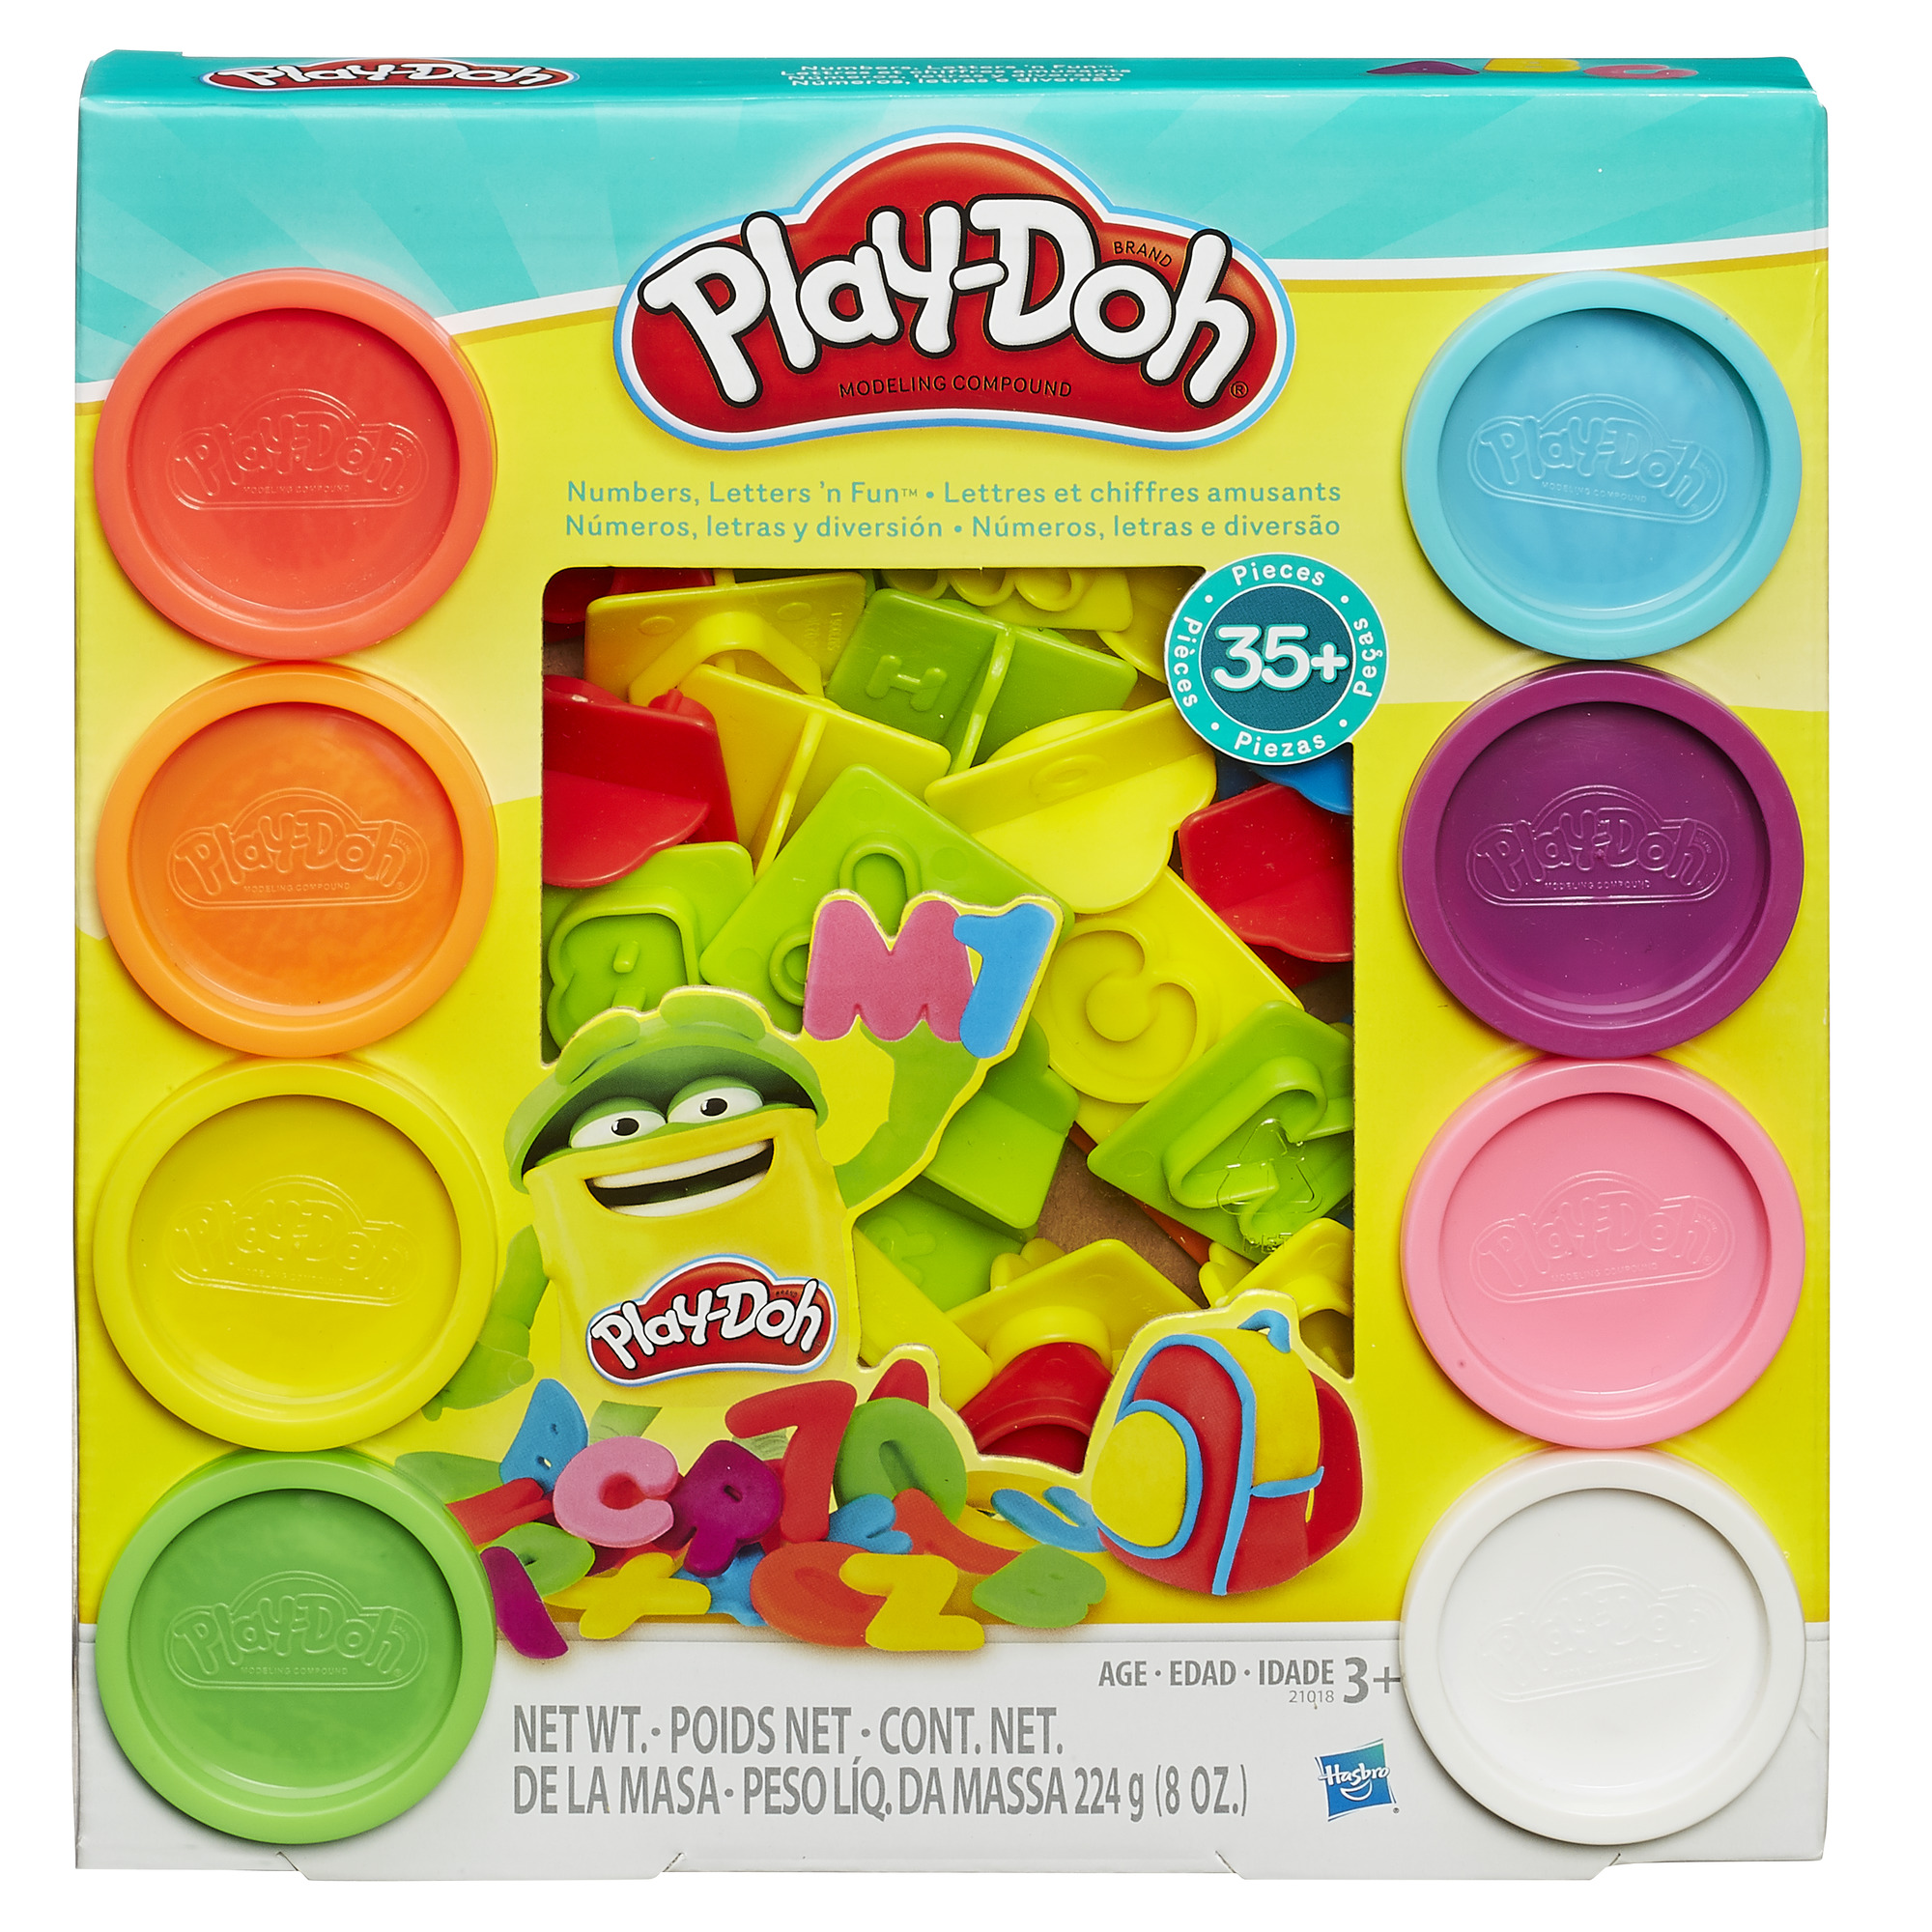 Play-Doh Numbers, Letters ‘N Fun Set with 8 Cans & 35+ Tools Only $6.96!